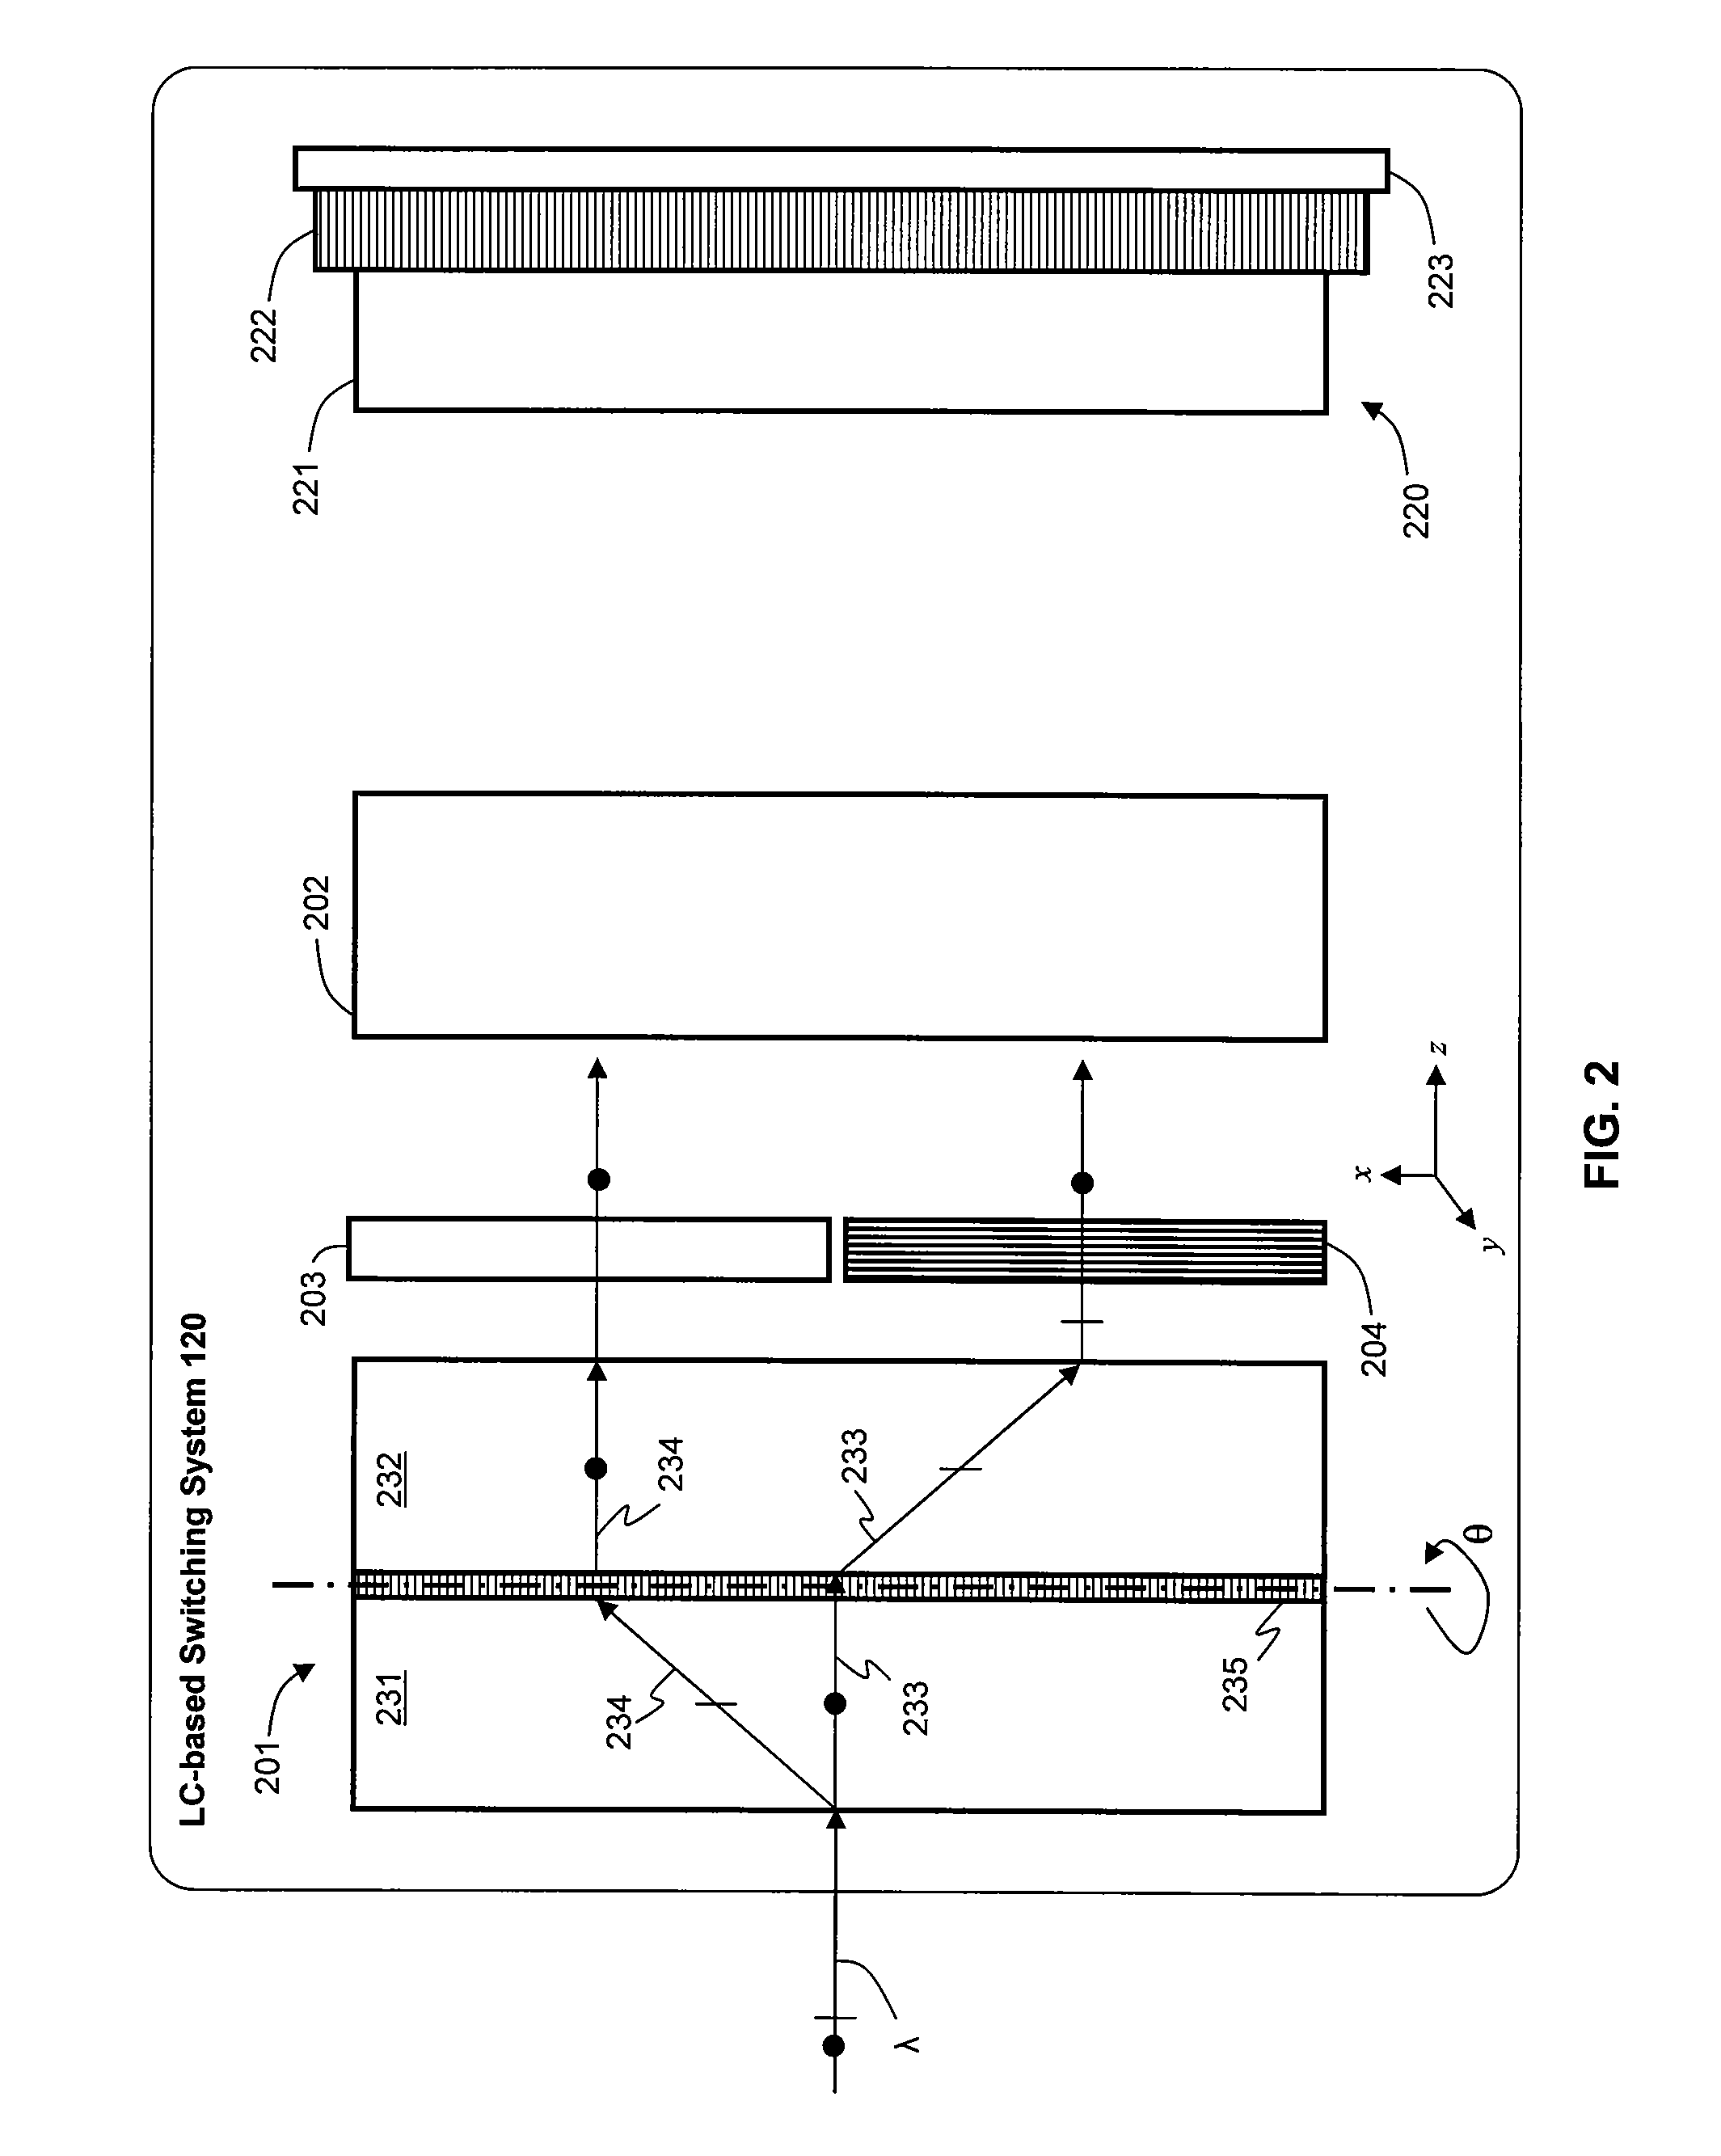 Liquid crystal optical device configured to reduce polarization dependent loss and polarization mode dispersion